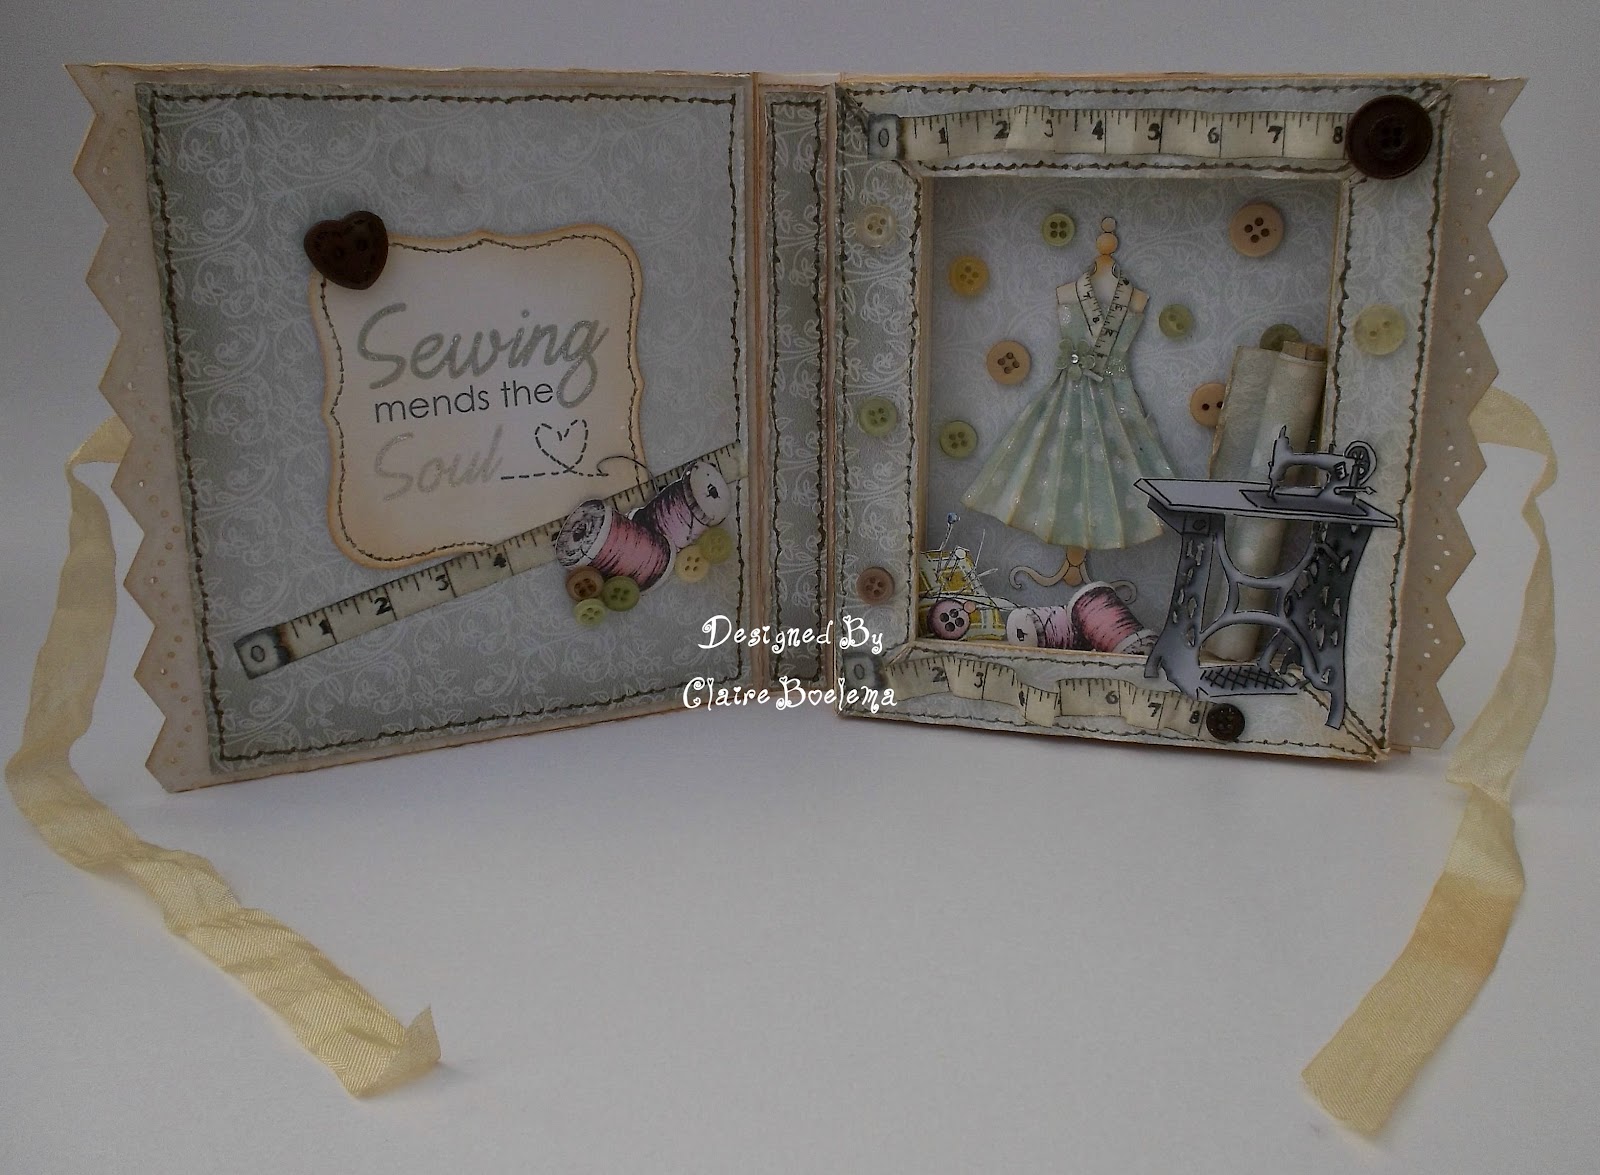 What Shall I Make Today?: Vintage Sewing Book Card